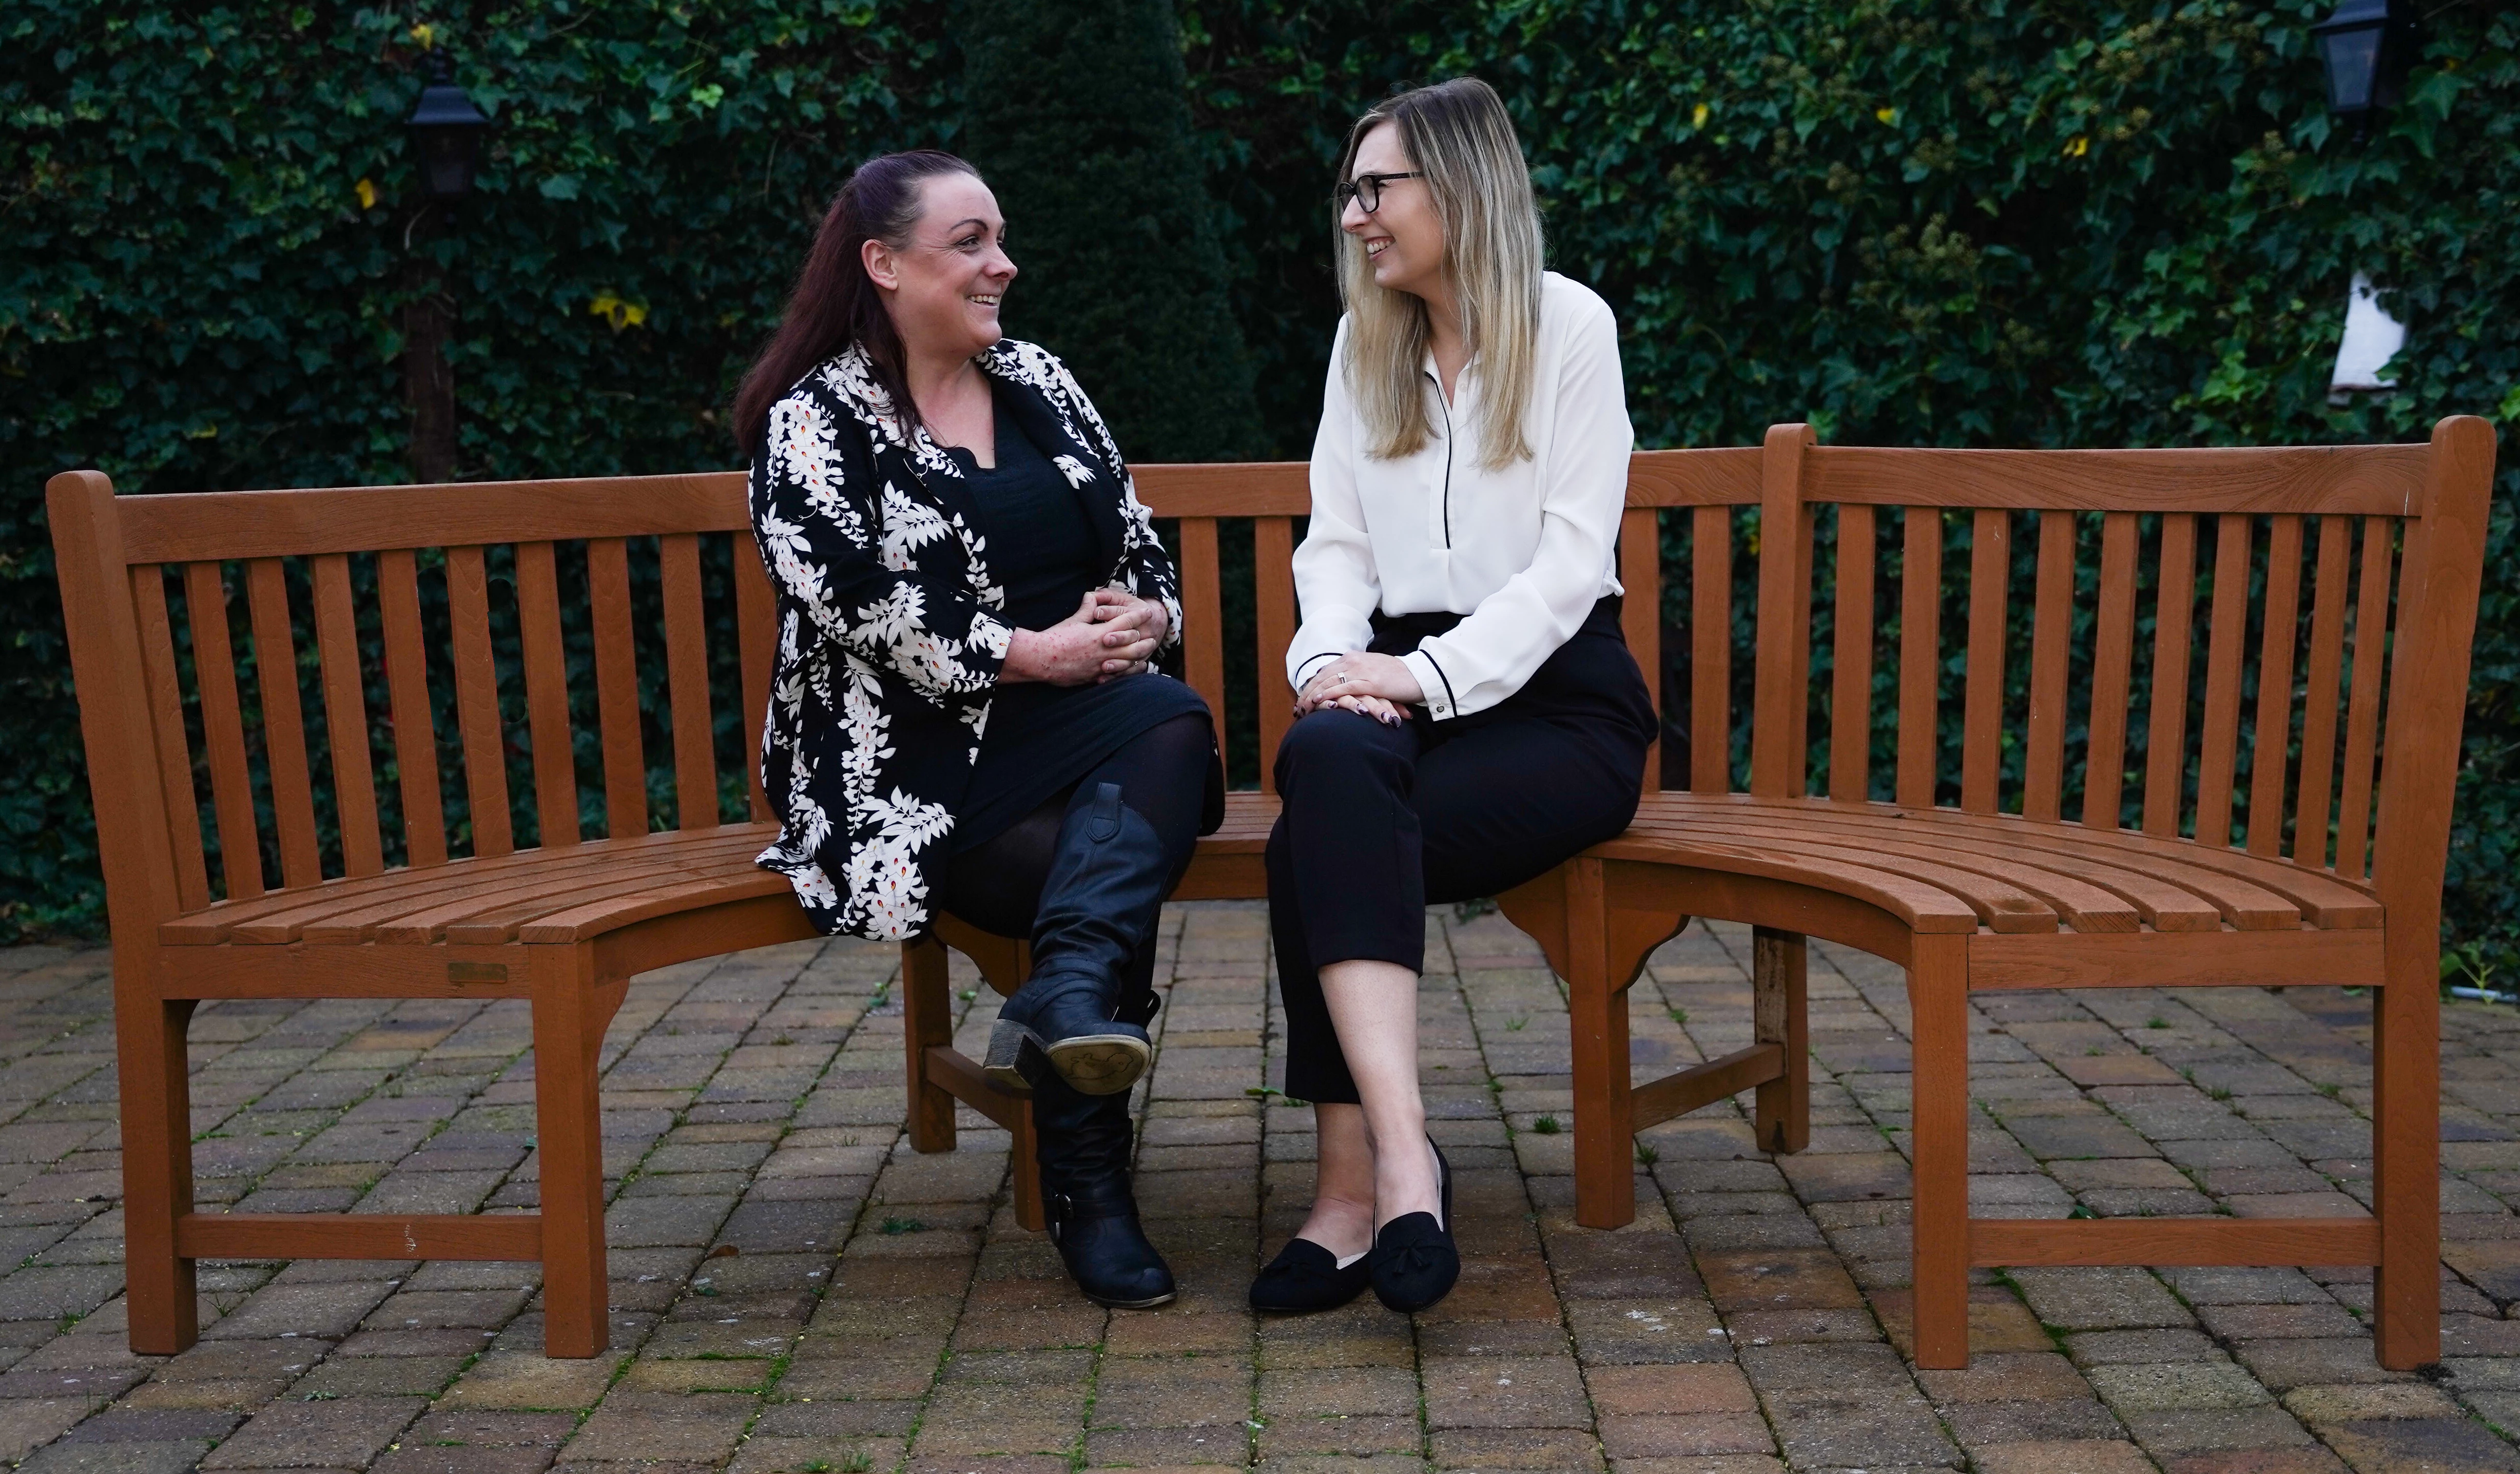 Account manager Jenny Turton and brand and culture manager Natalie White